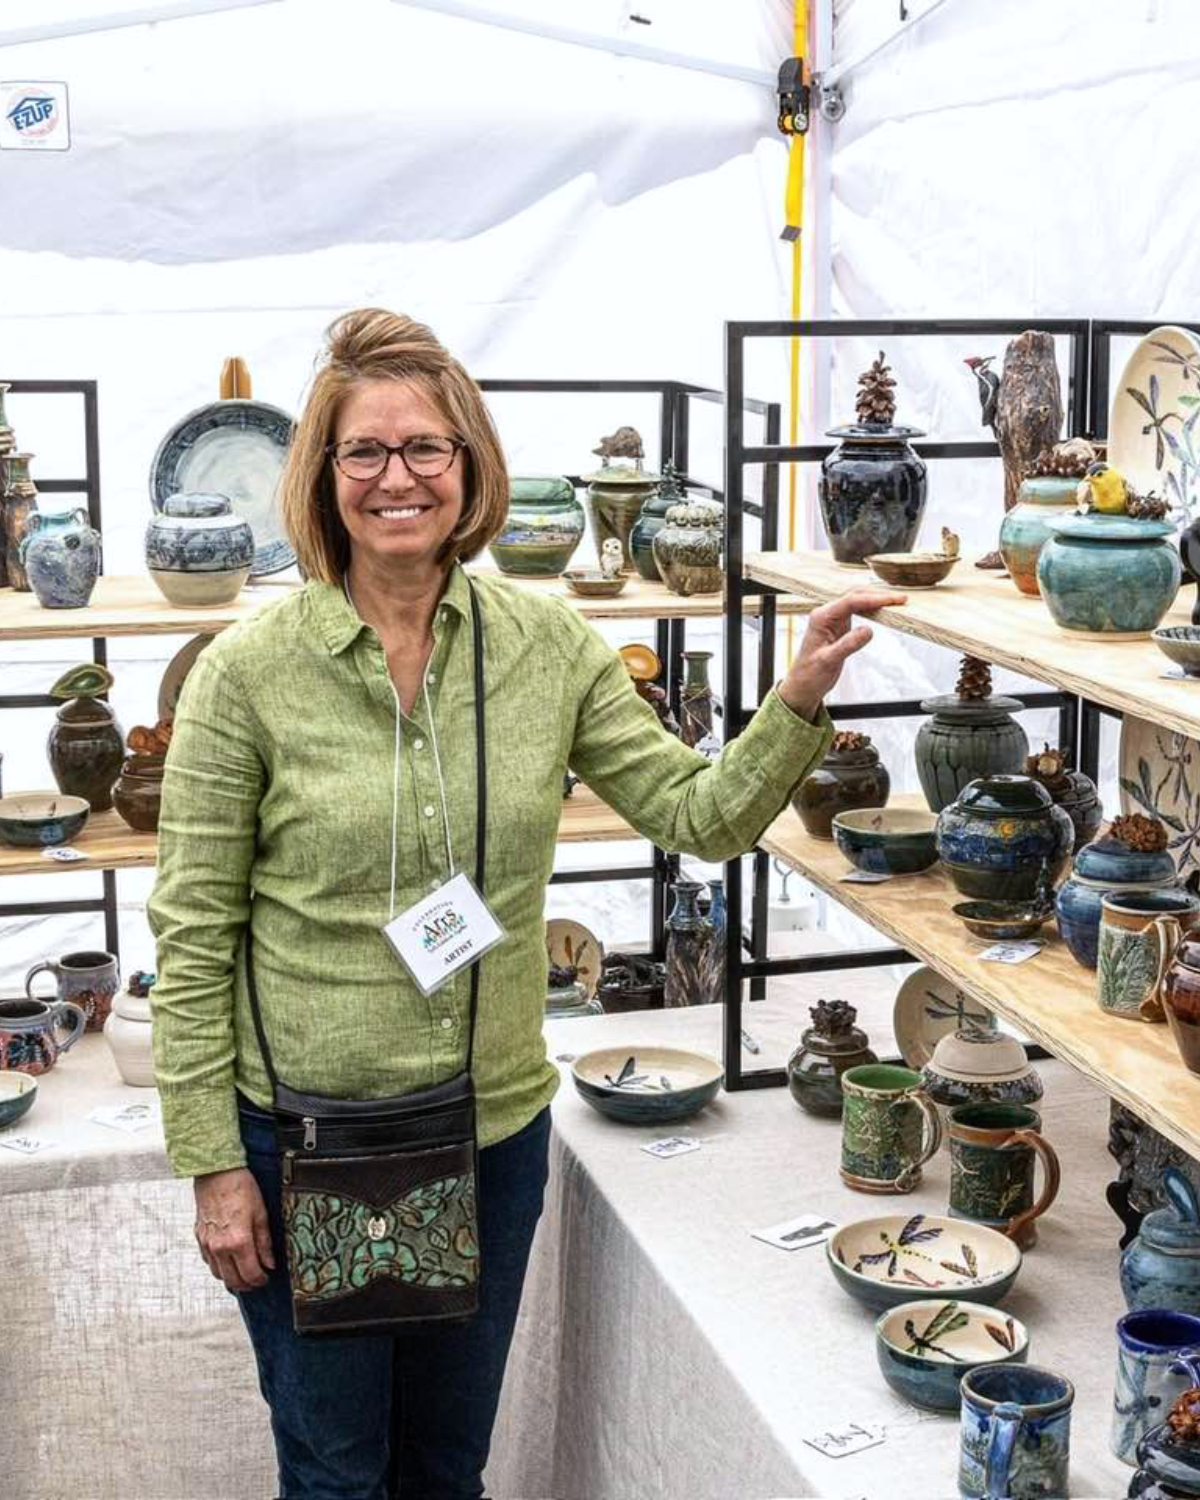 Tammy Quigley Rosenow showcasing her potter at an event.